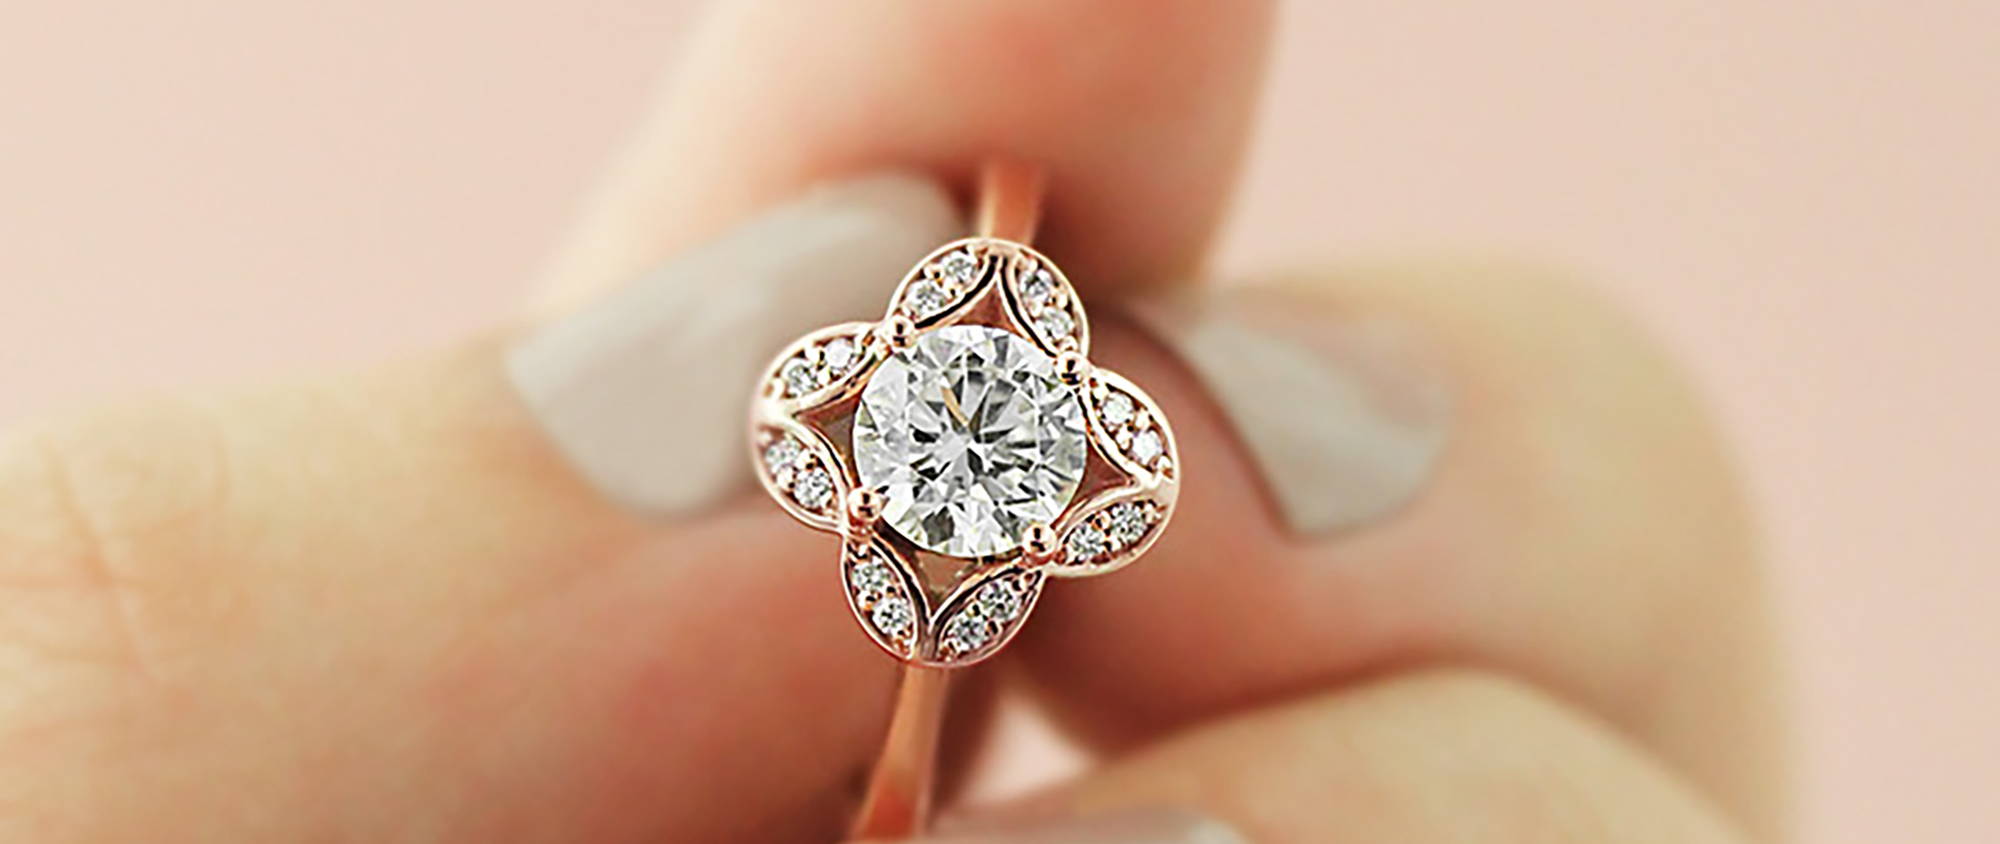 6 Tips For Buying An Ethical Engagement Ring